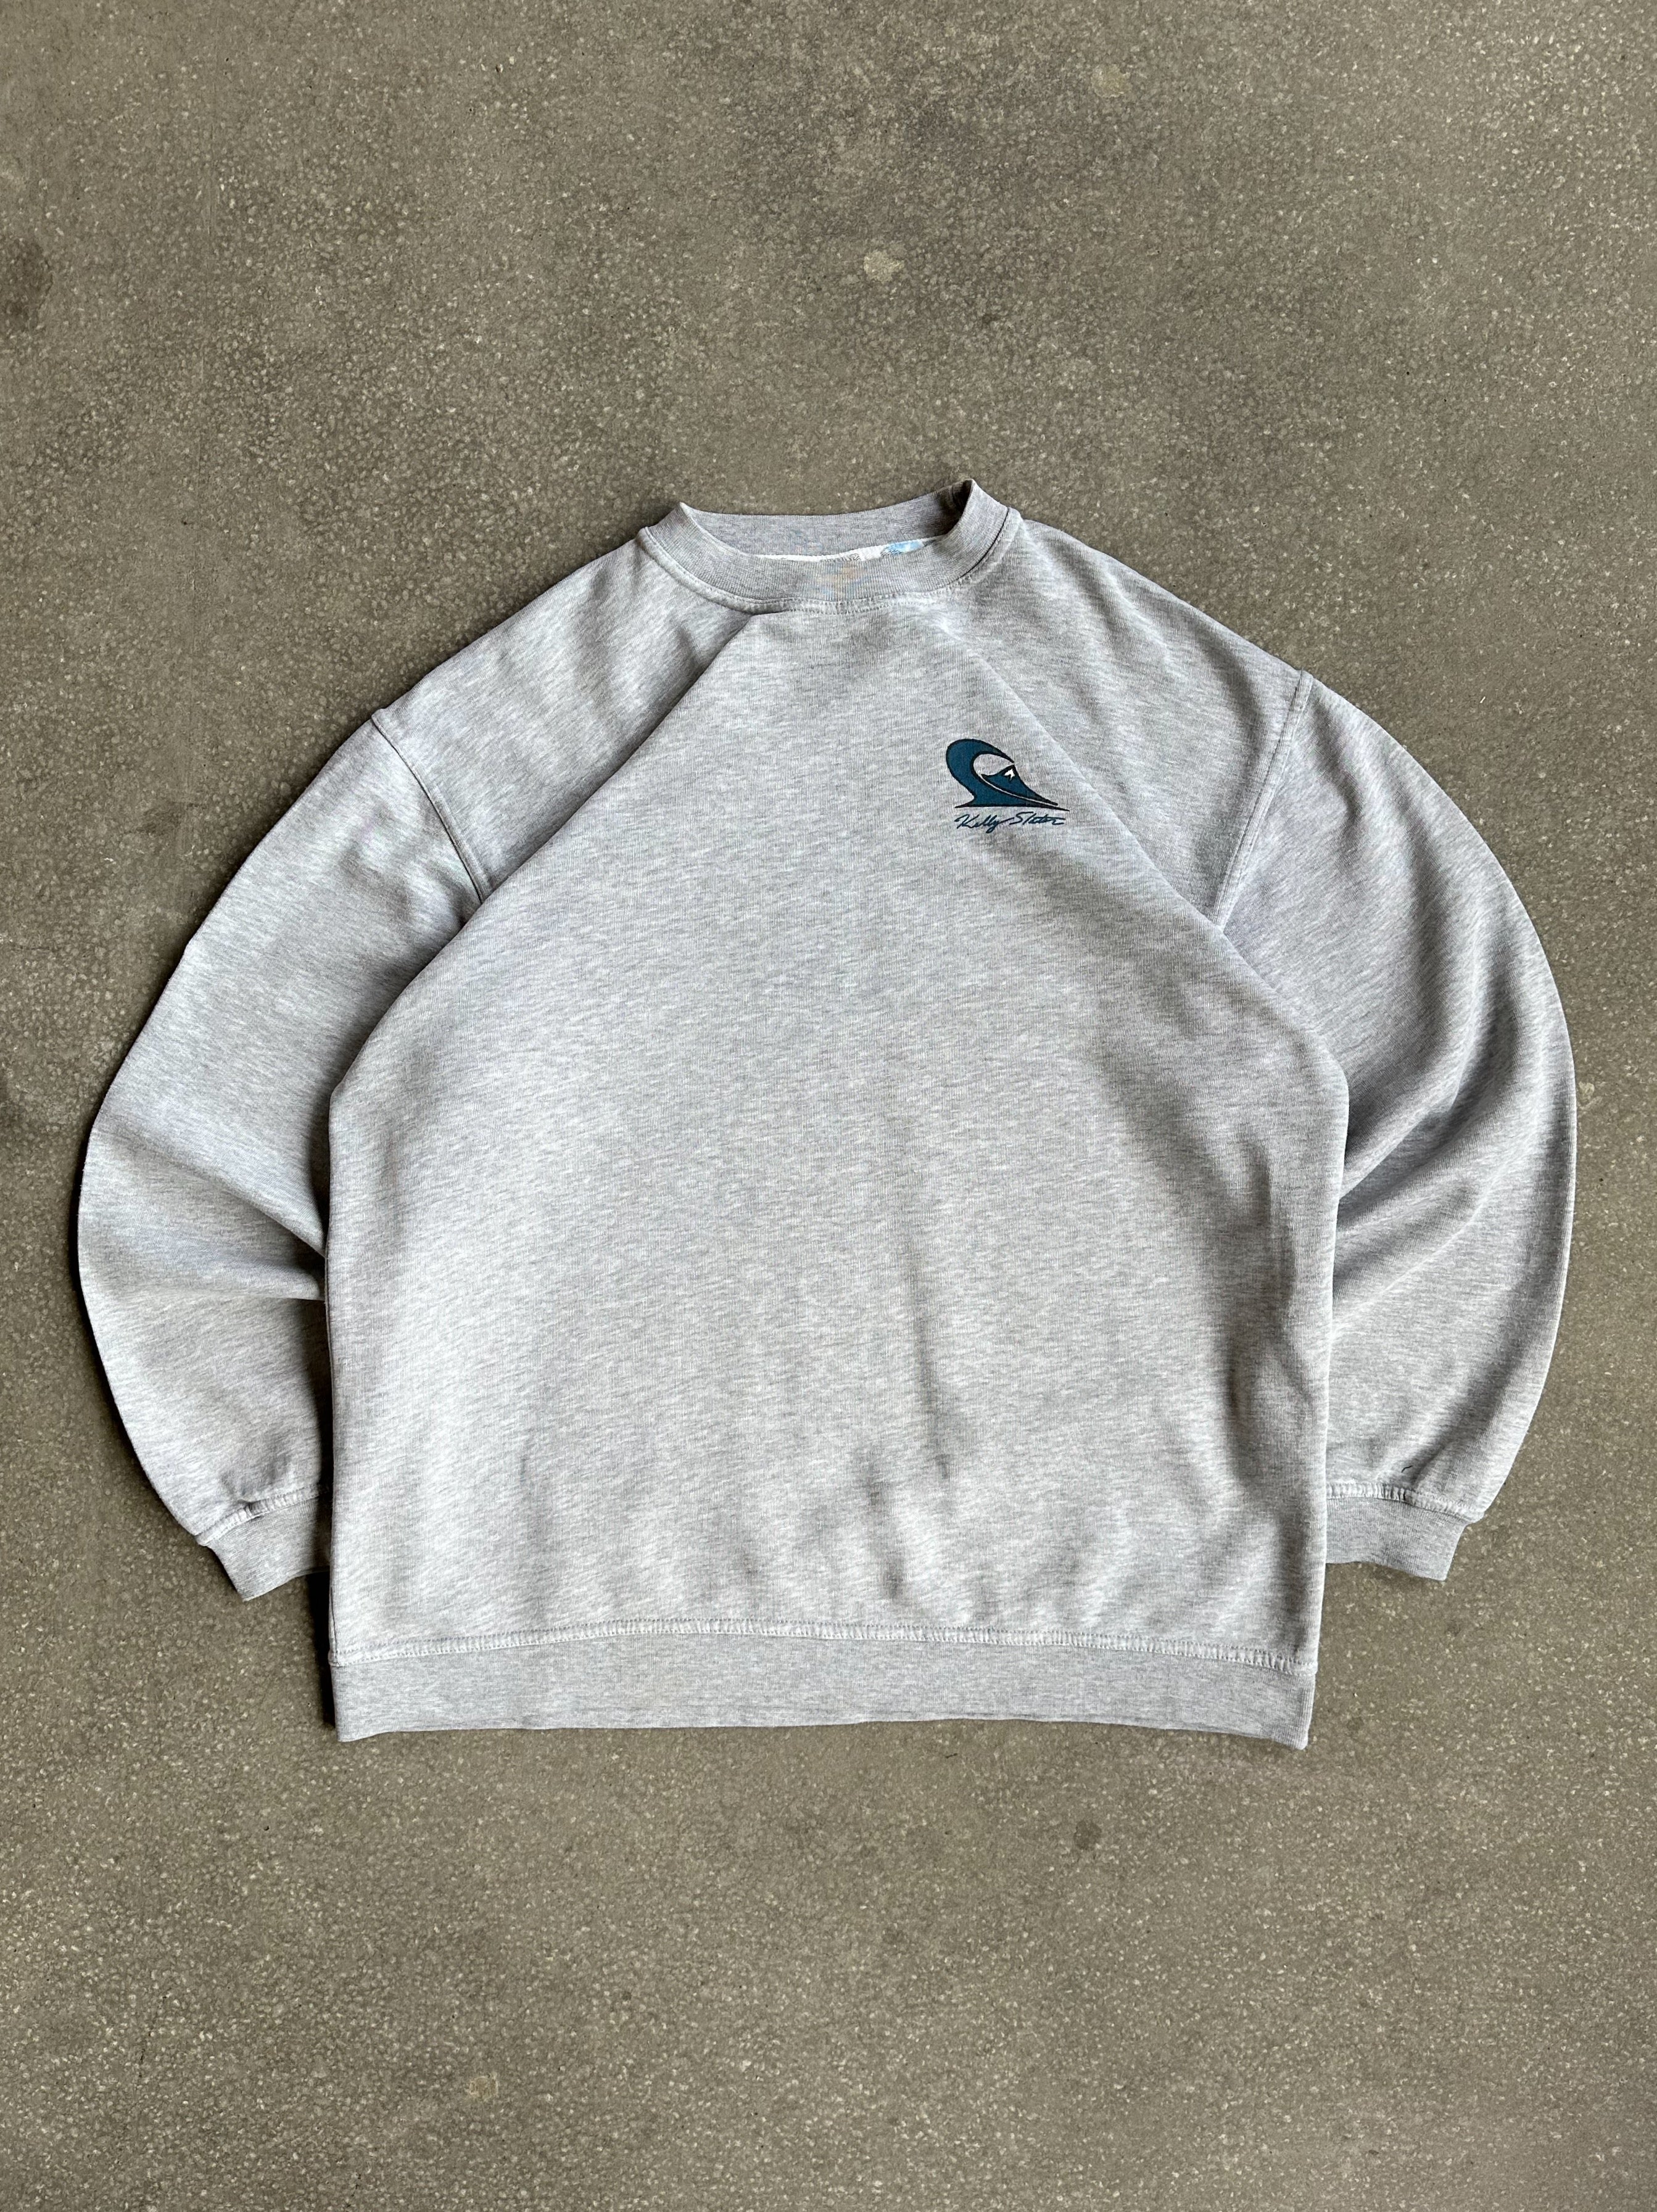 Vintage Quiksilver Kelly Slater Crewneck Sweater - Extra Large